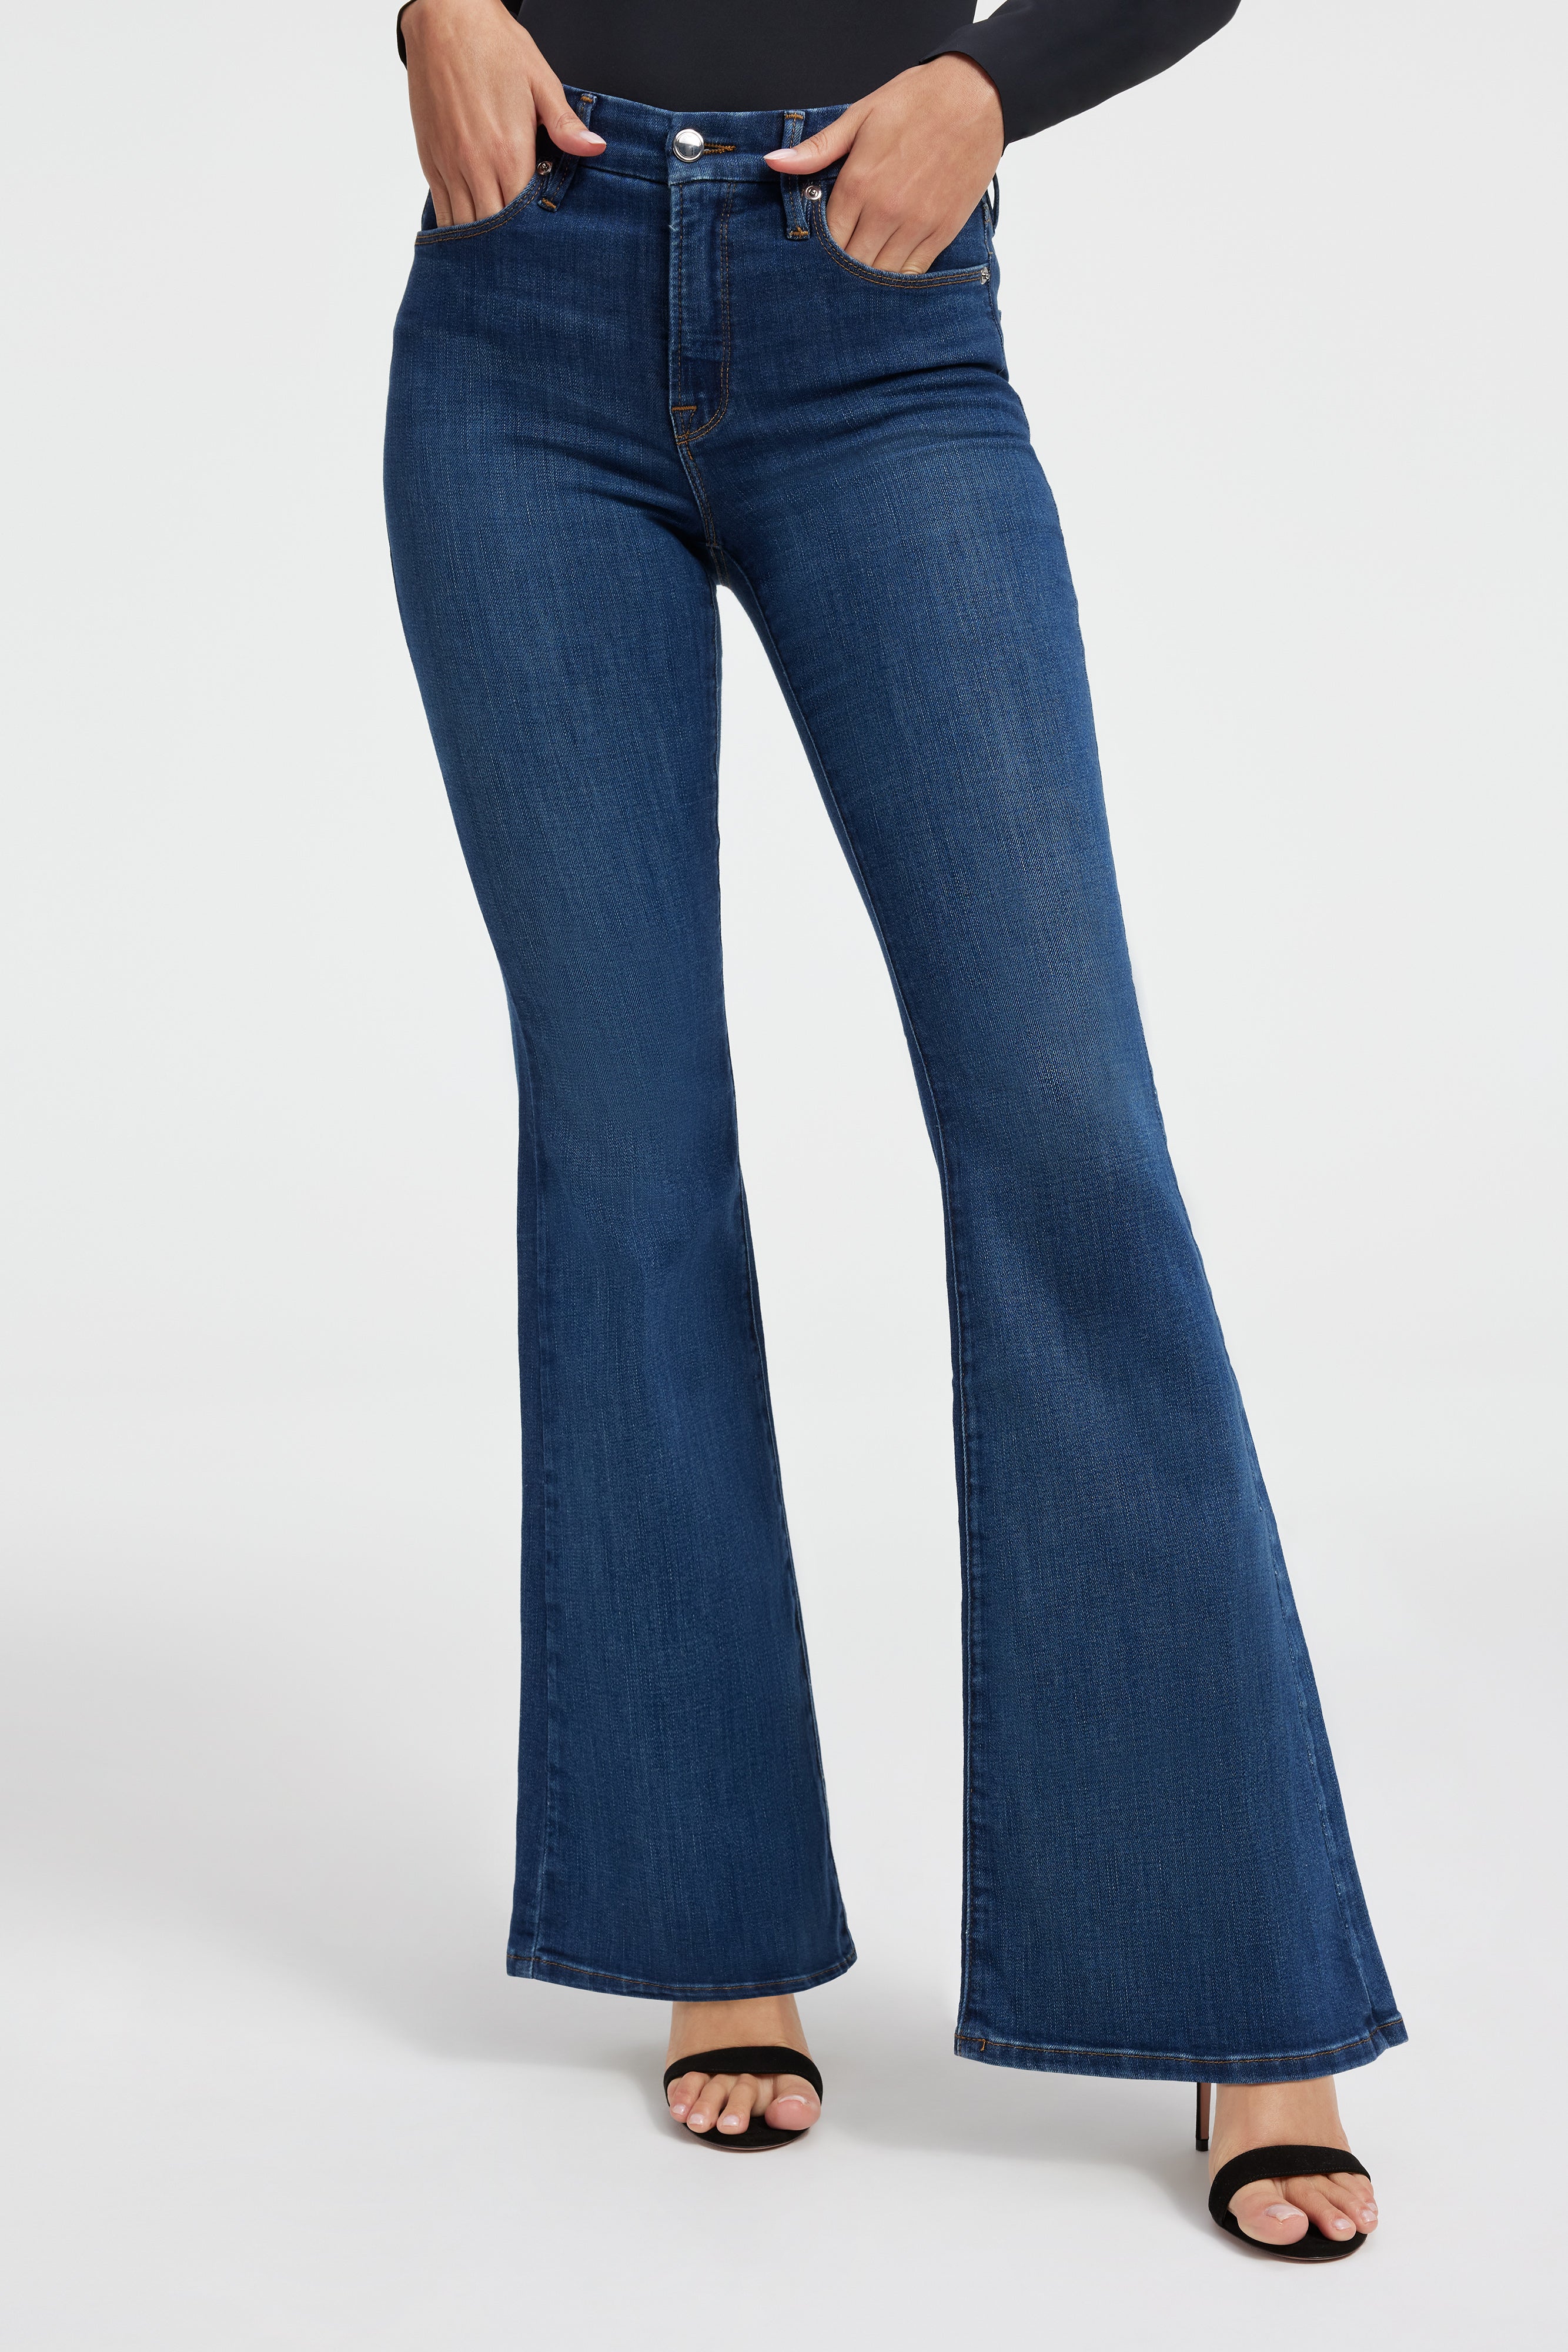 Image of GOOD LEGS FLARE JEANS | BLUE004